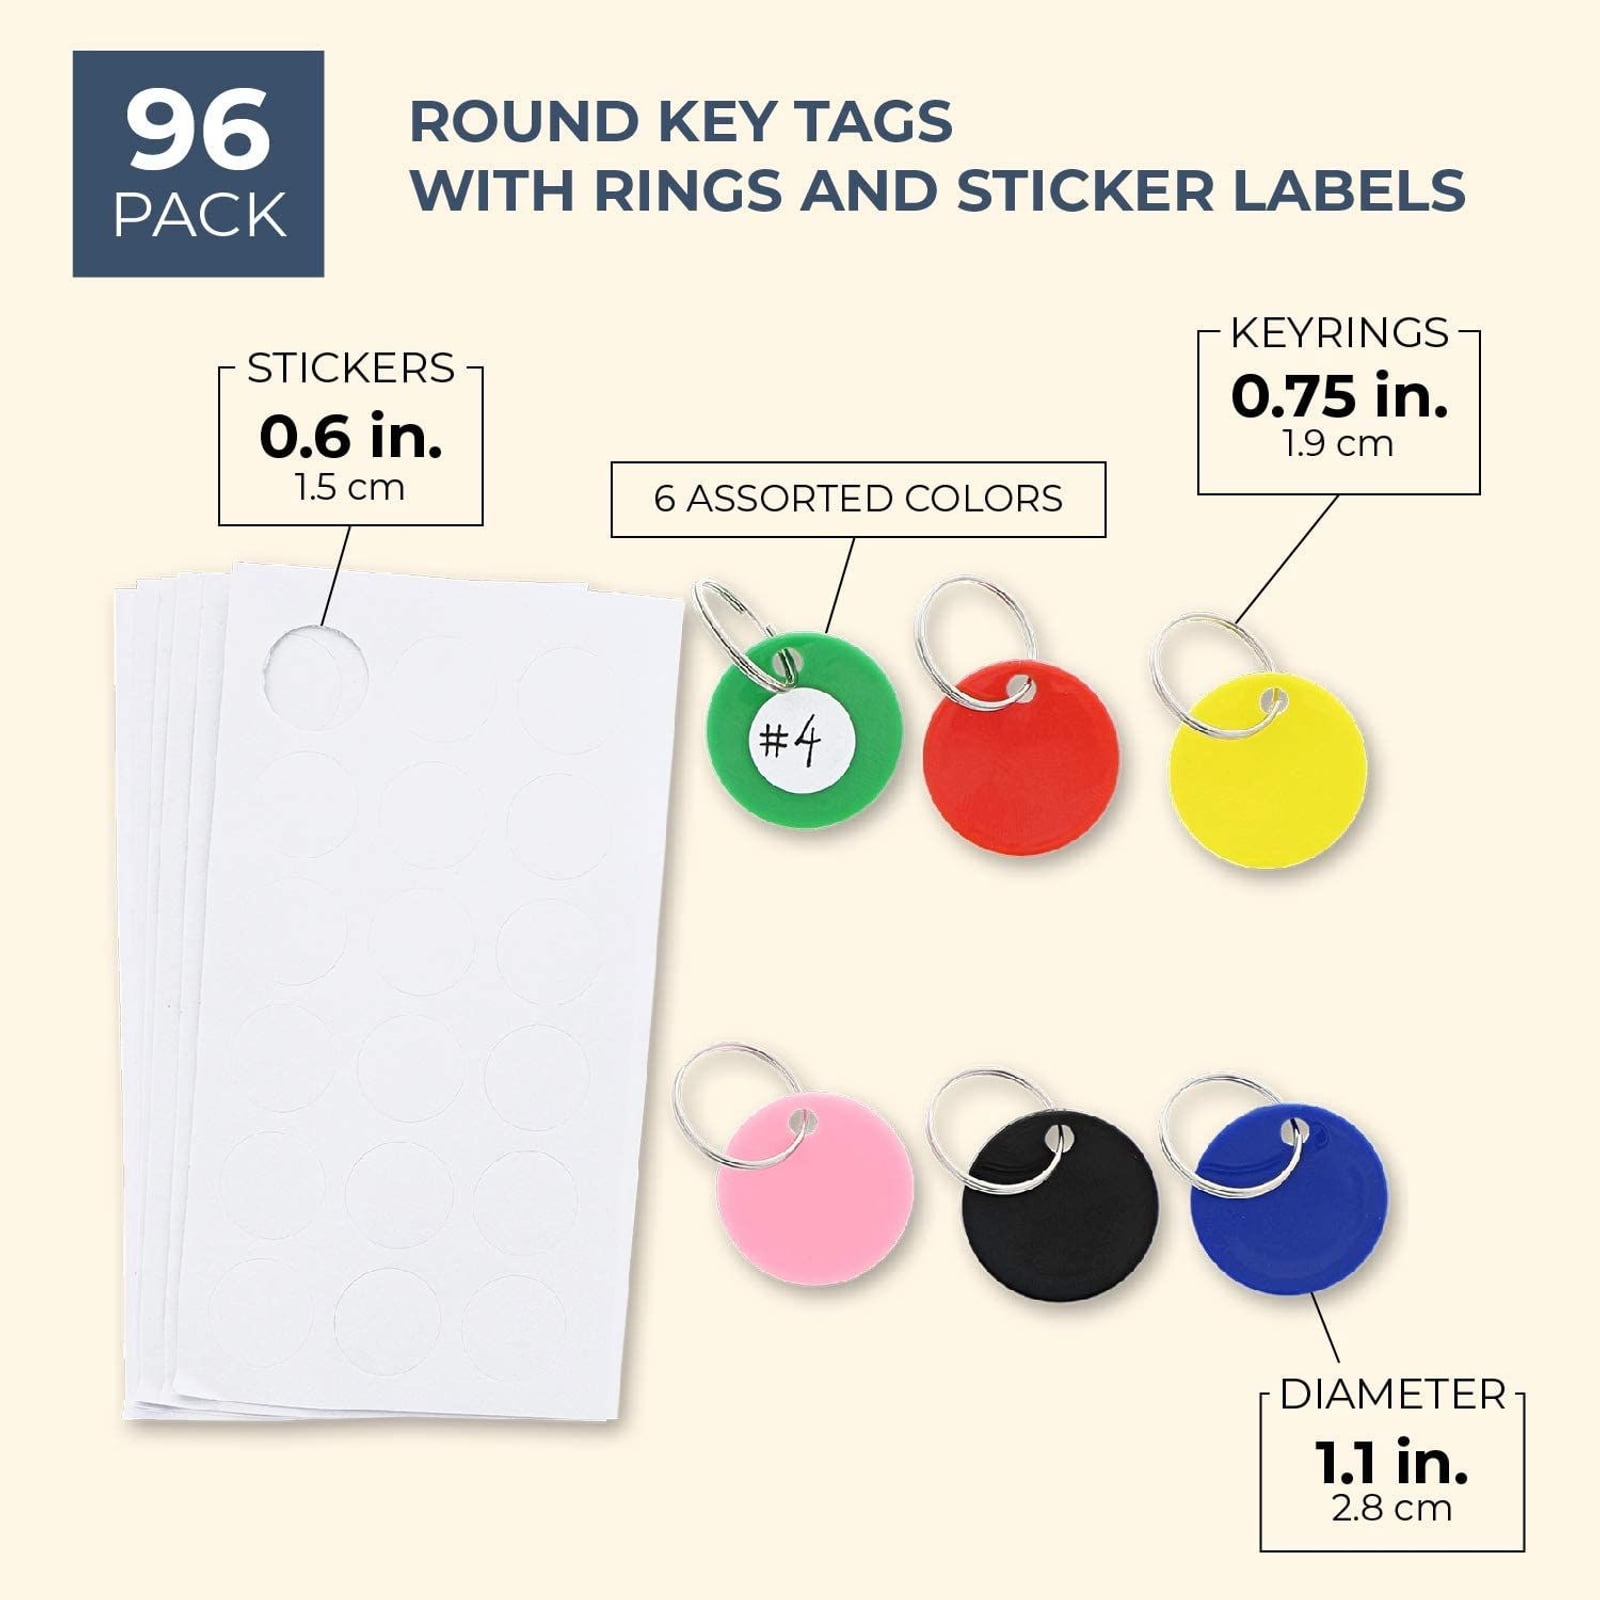 White Juvale Round Key Tags with Split Rings and White Sticker Labels 96 Pack 